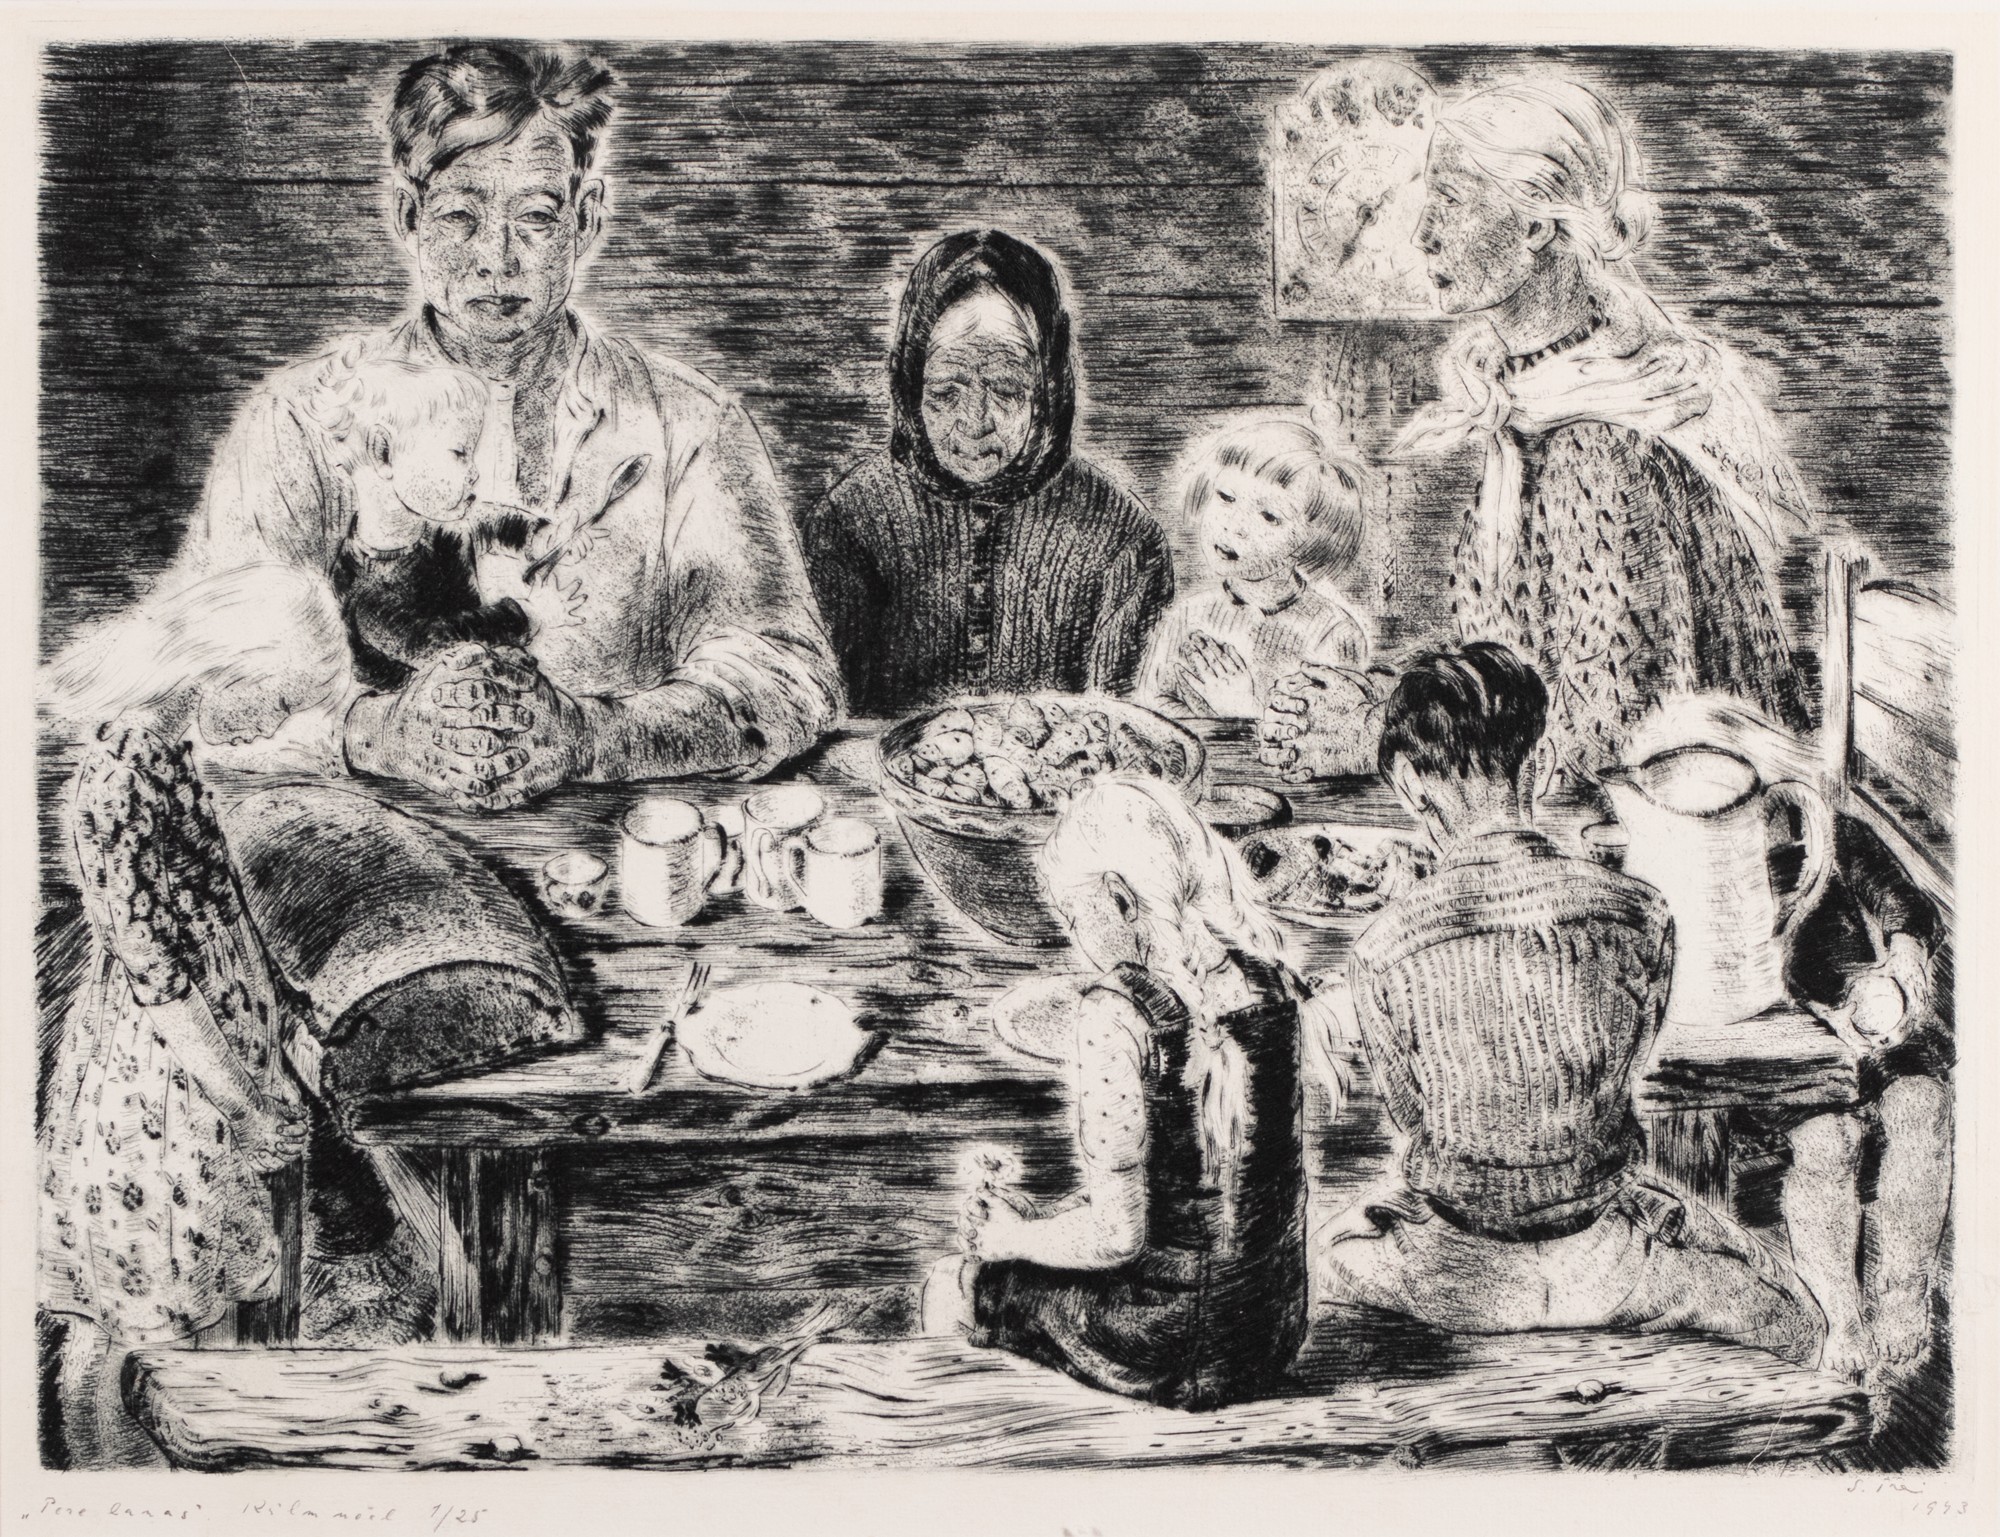 Salome Trei "Family at the Table"